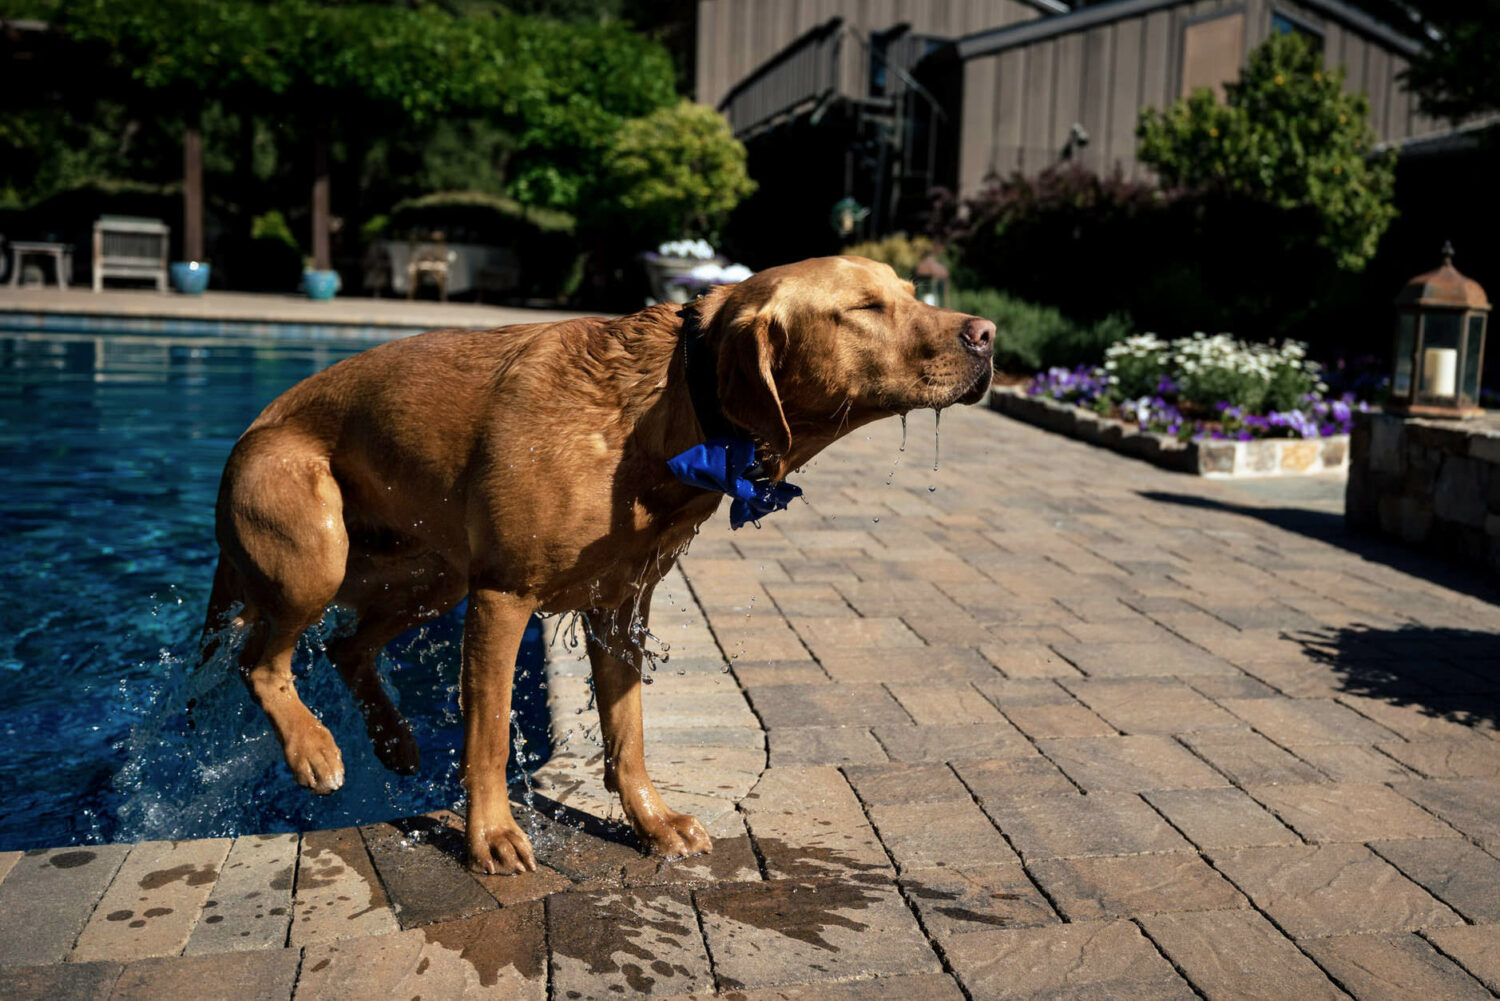 A dog dries off at a backyard wedding with a pool.